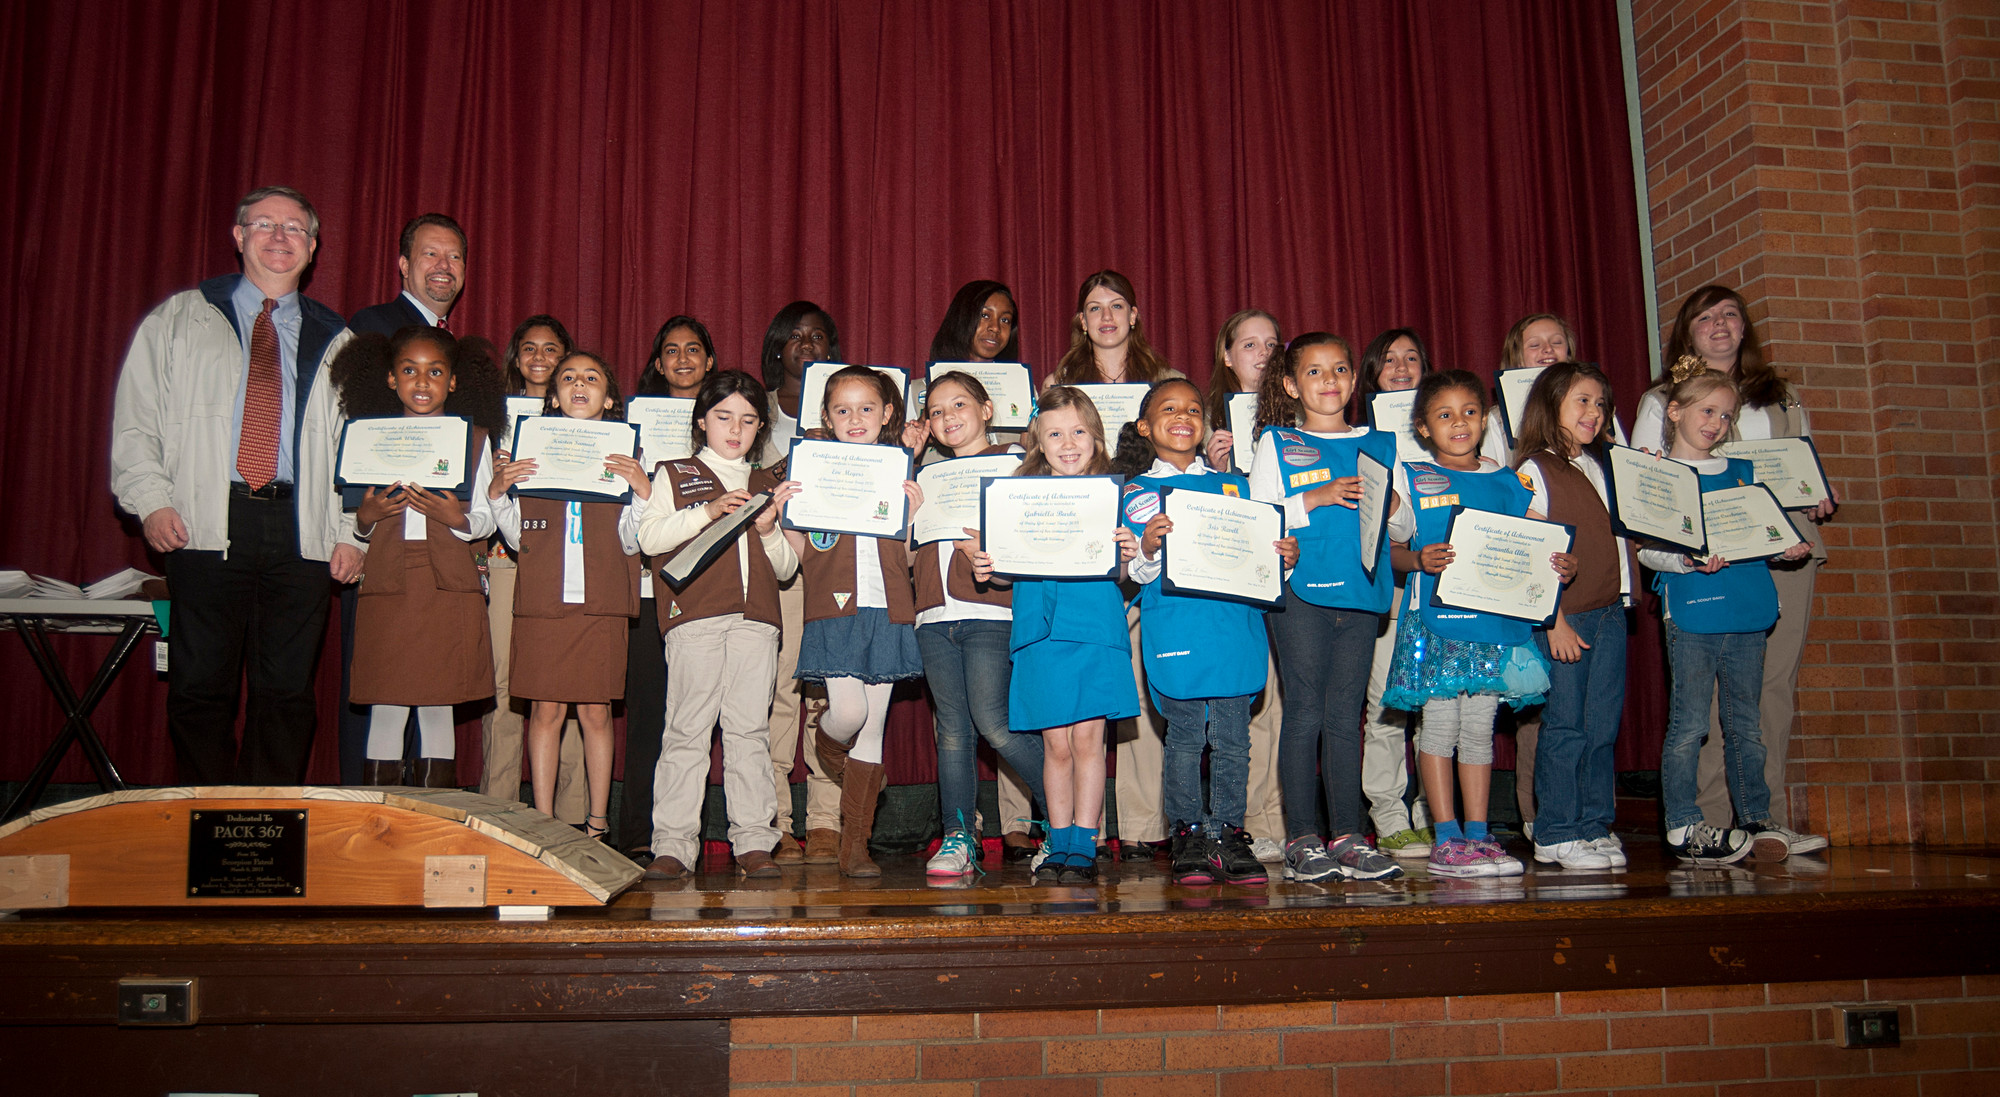 Judge Bob Bogle and Mayor Ed Fare join the many Girl Scouts who received awards on May 24.